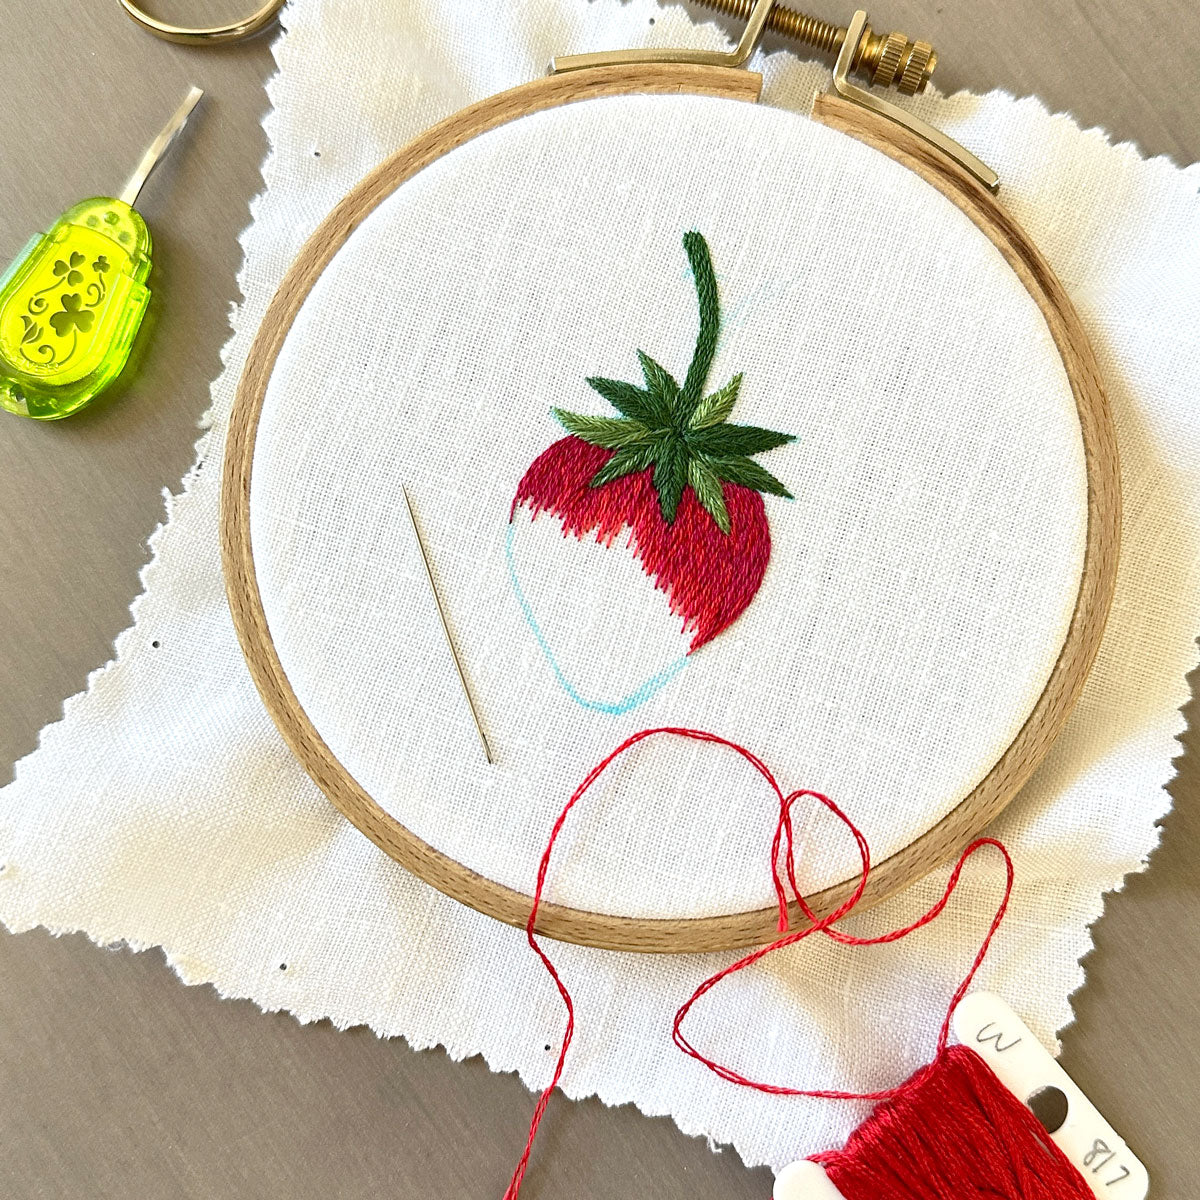 Single Strawberry on White Linen Hand Embroidered Art